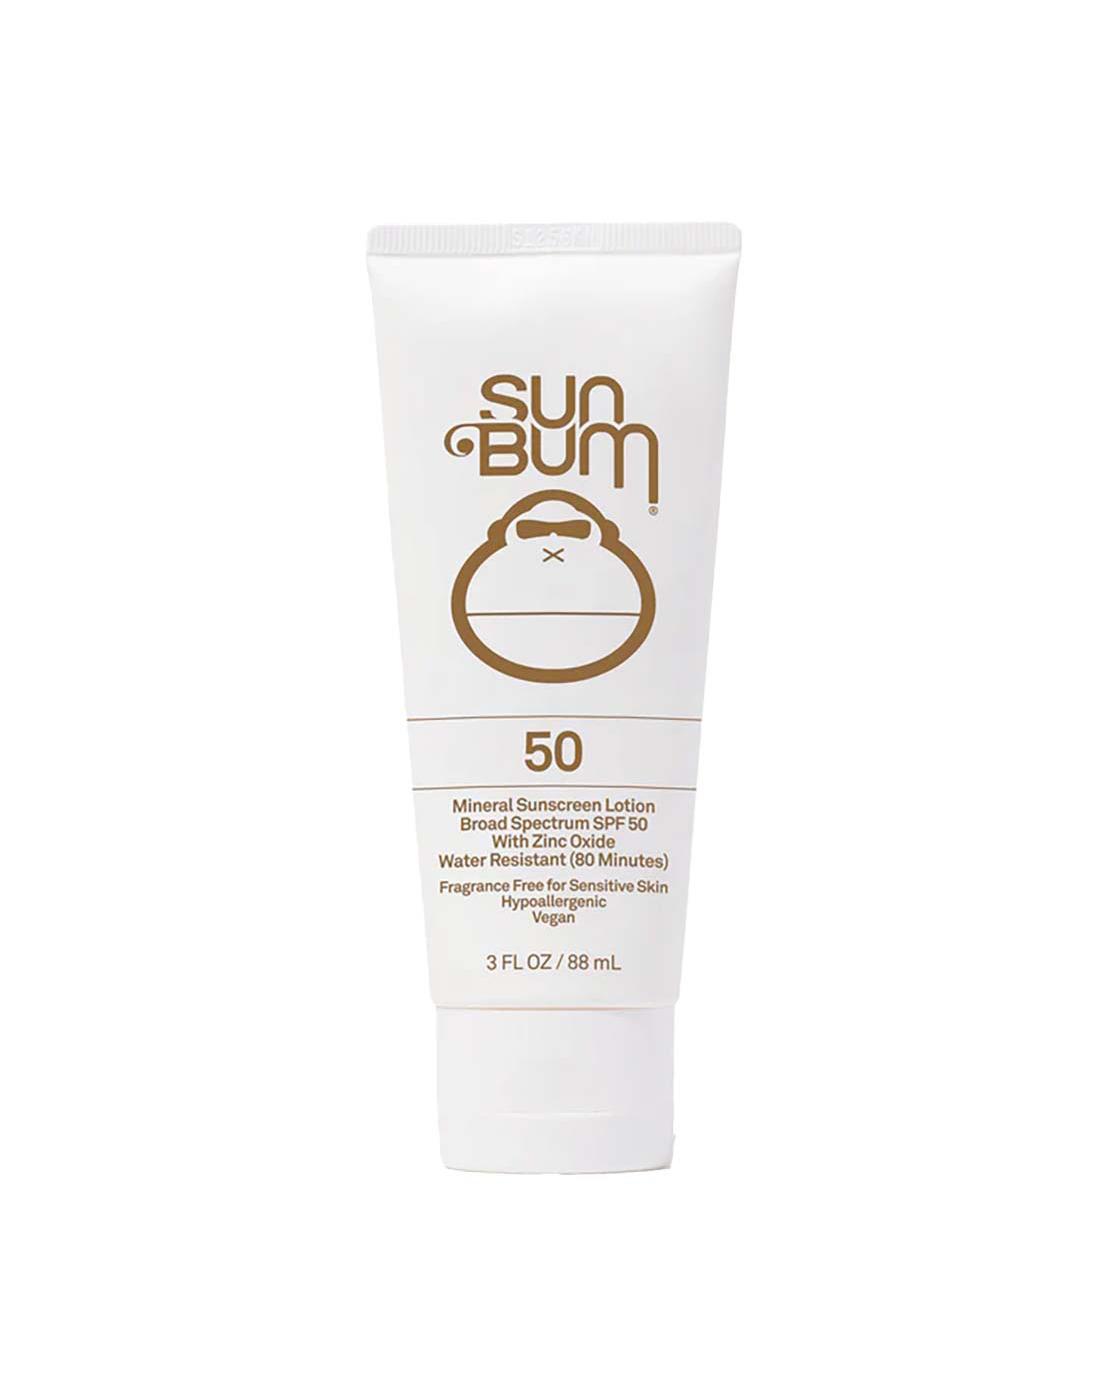 Sun Bum Mineral Sunscreen Lotion SPF 50; image 1 of 4